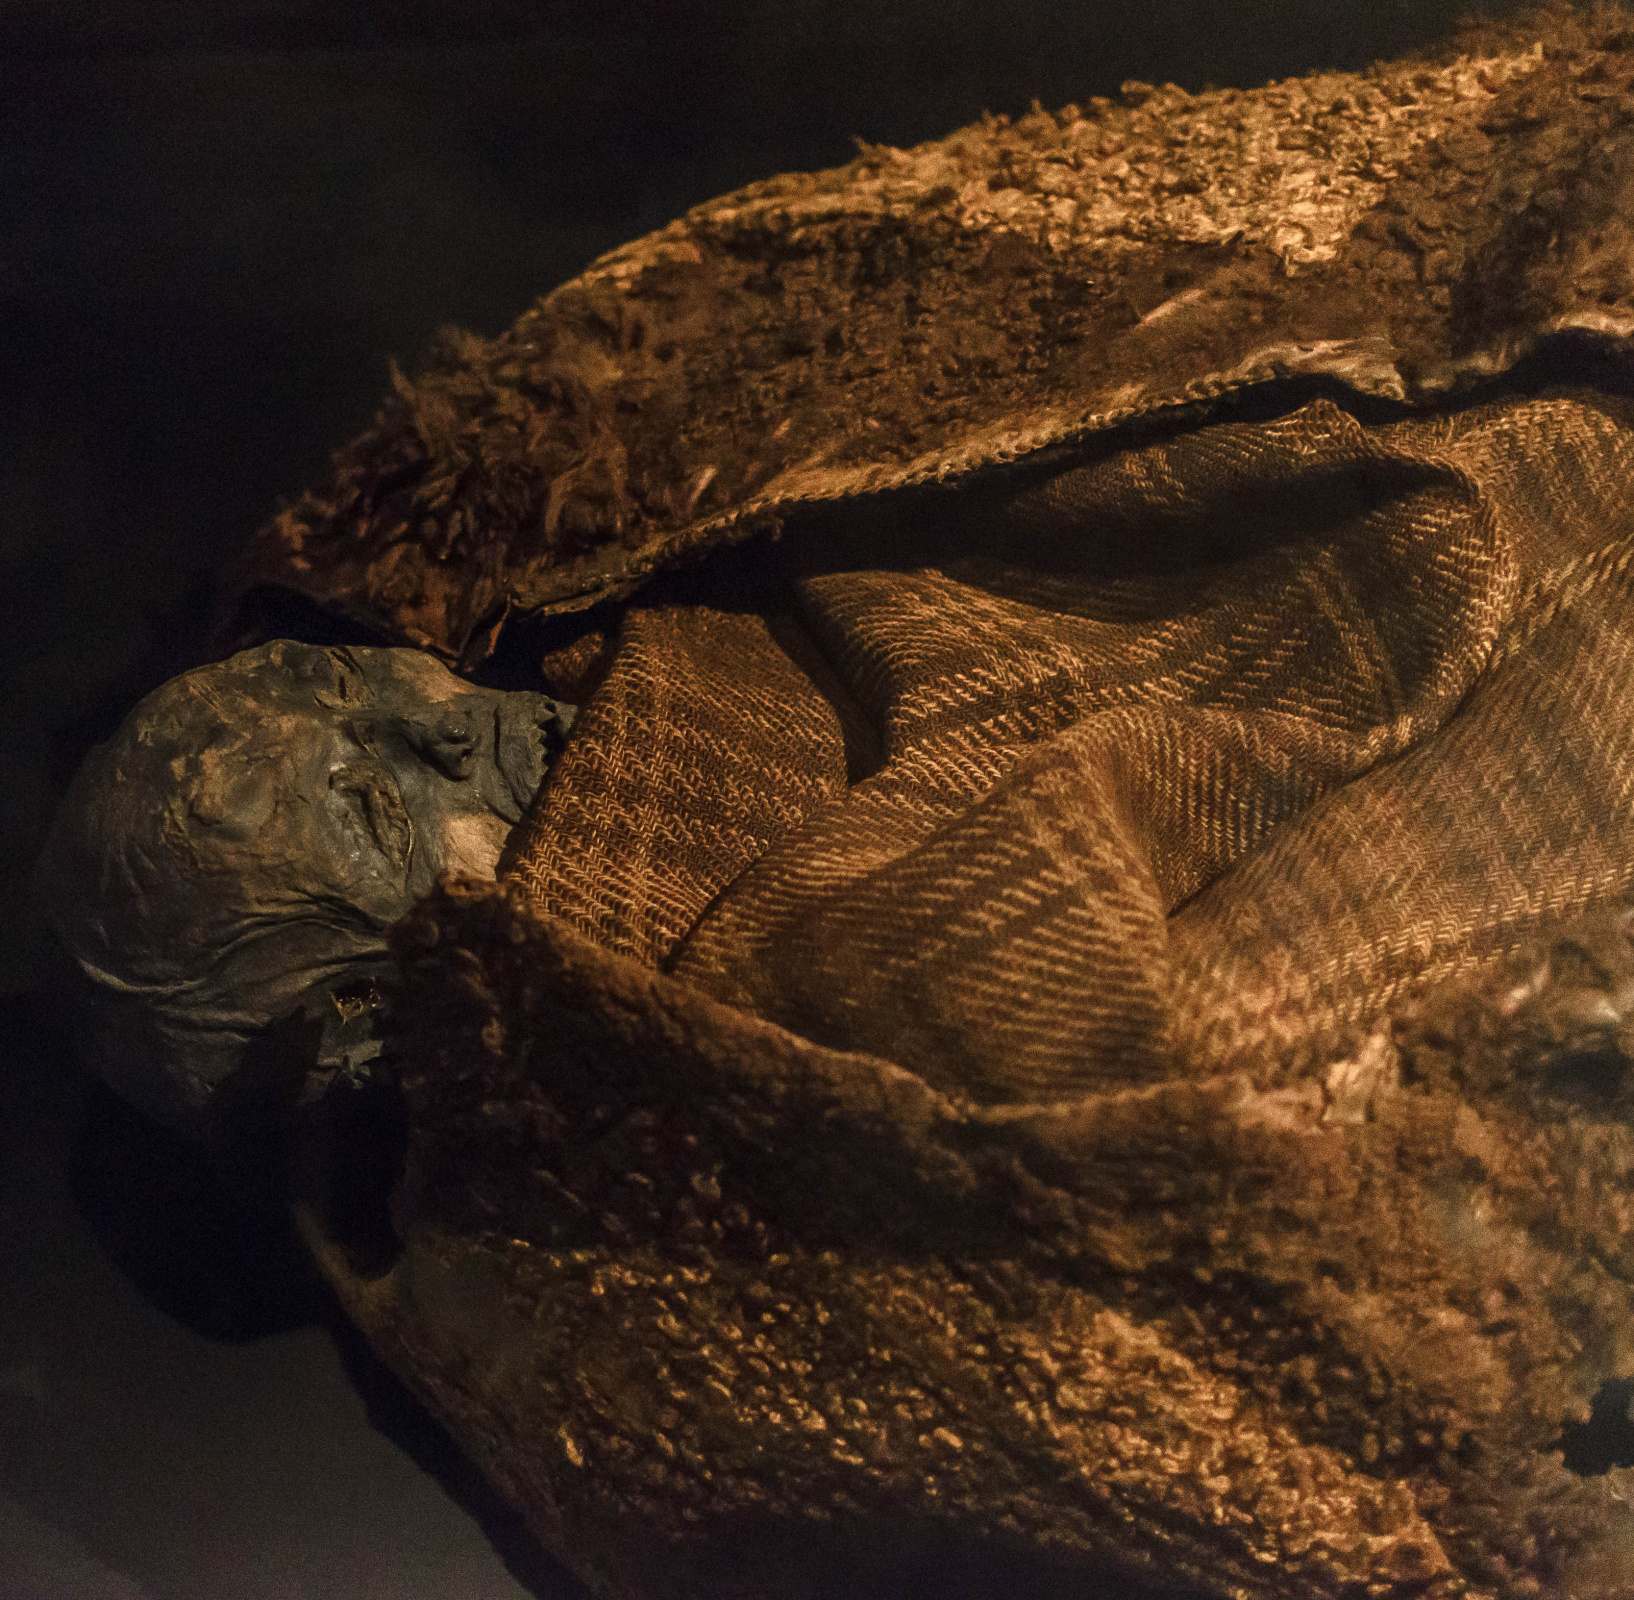 Huldremose woman on display at the National Museum of Denmark